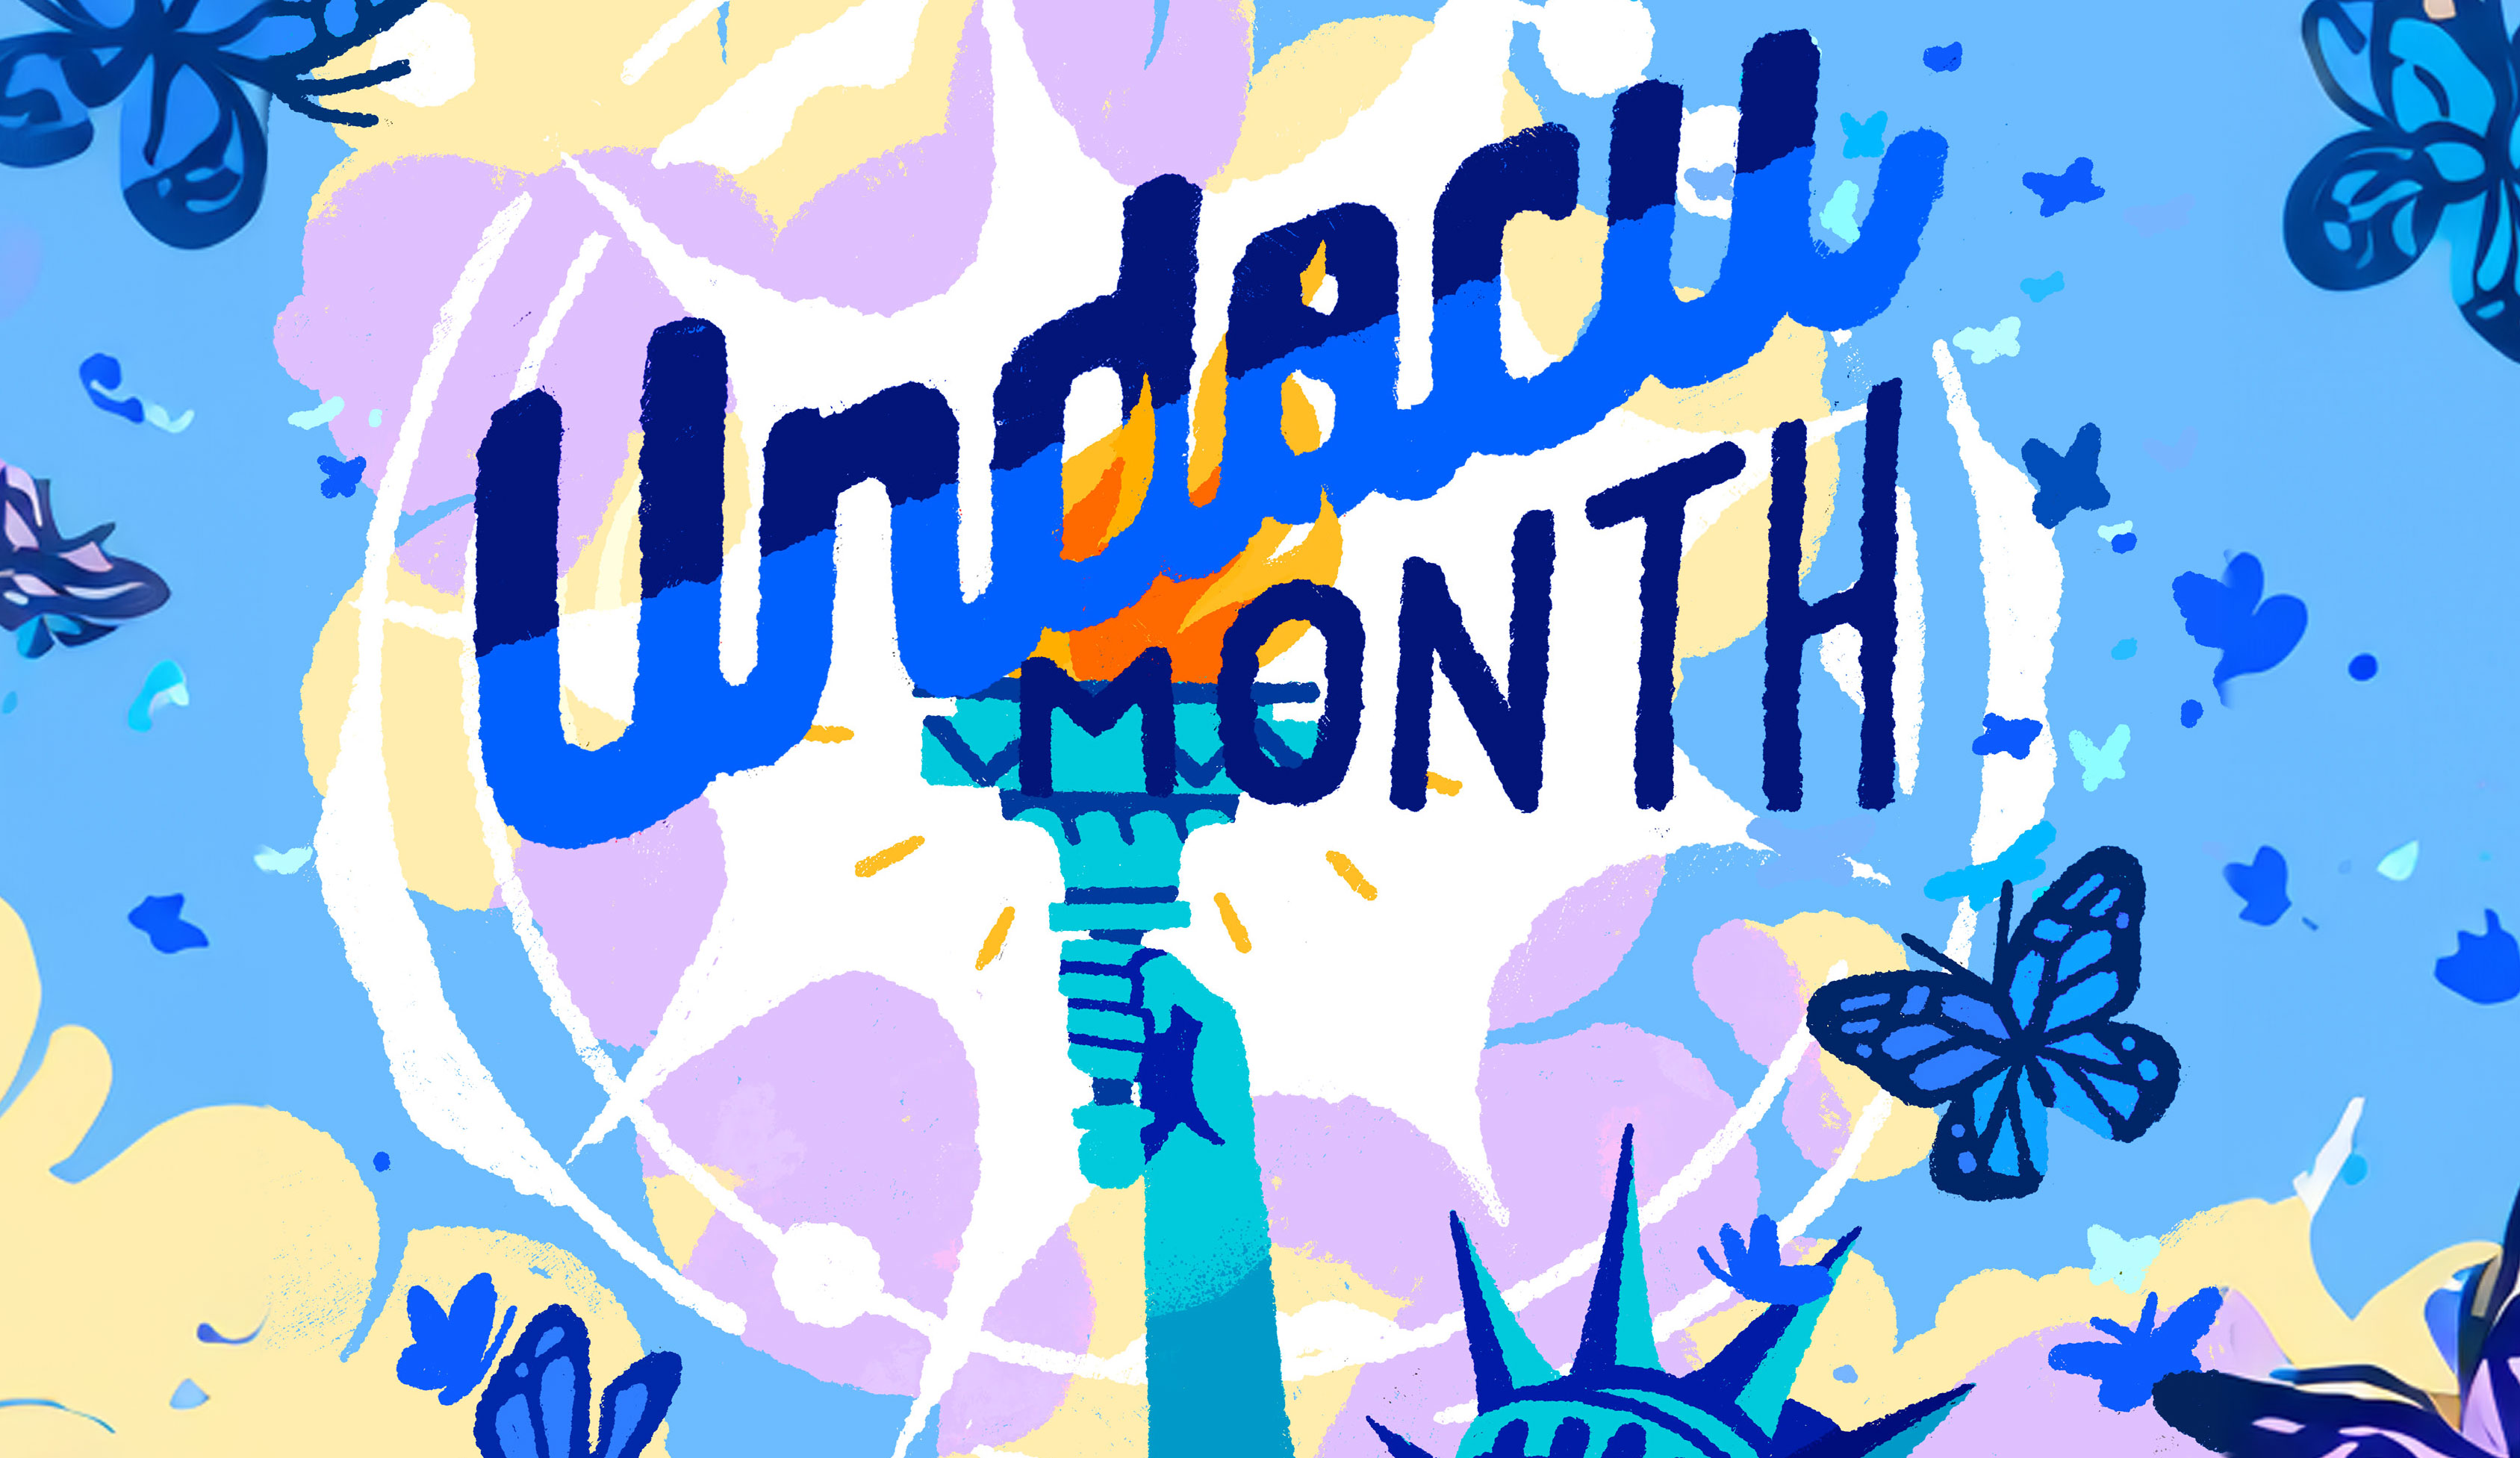 decorative UndocuMonth banner with butterflies and the statue of liberty's torch on a light blue background.